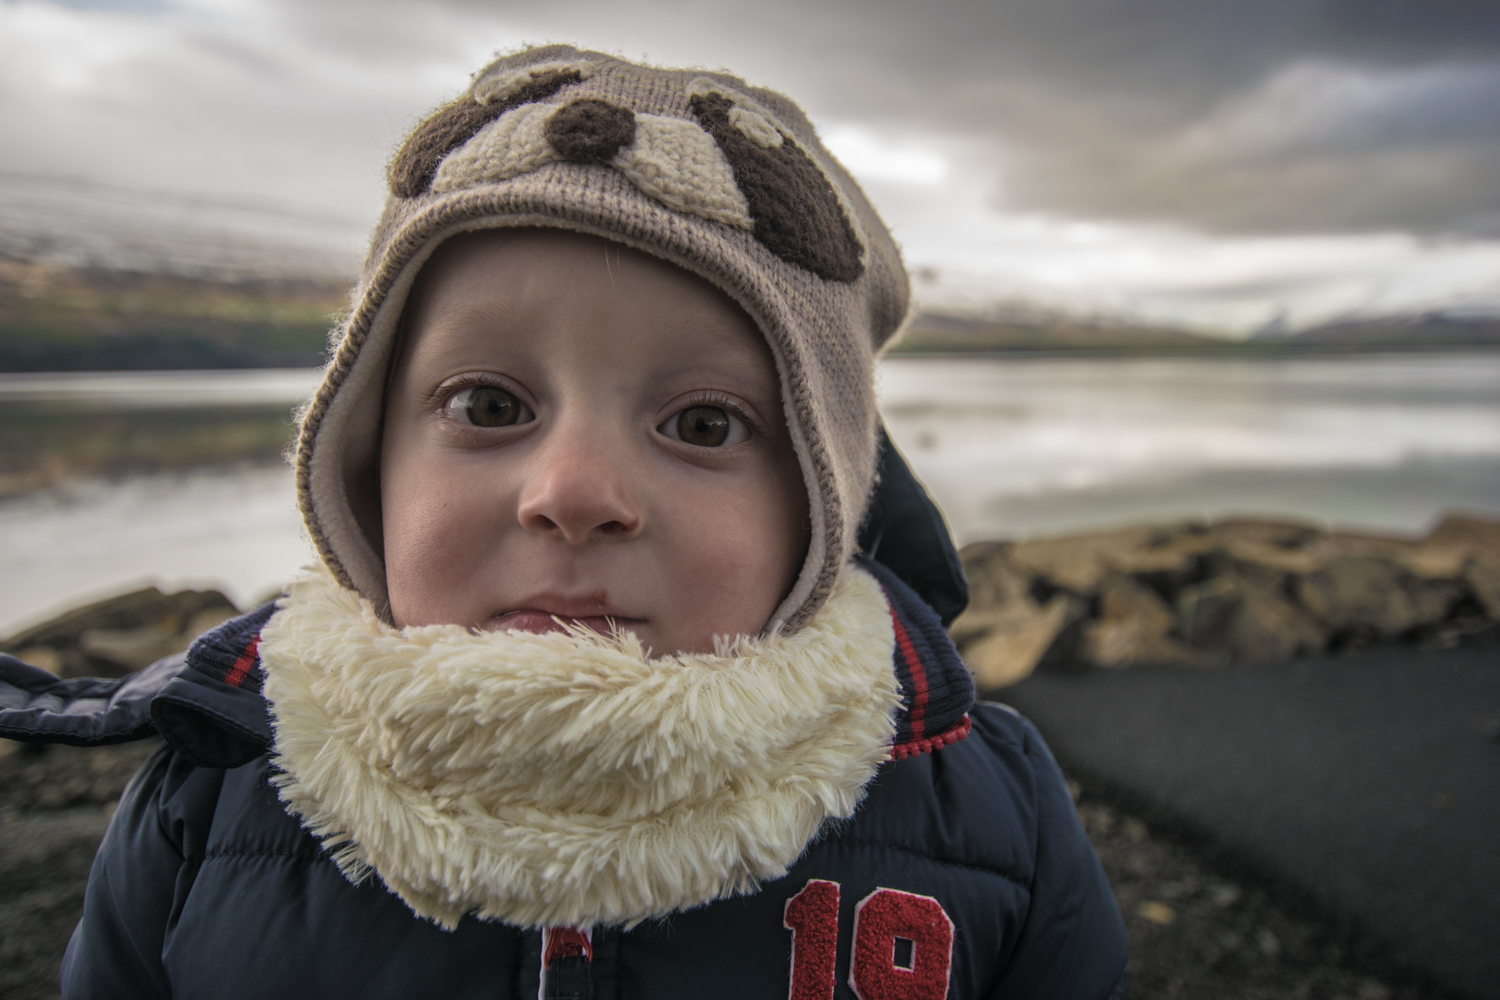 Iceland is amazing for kids of all ages